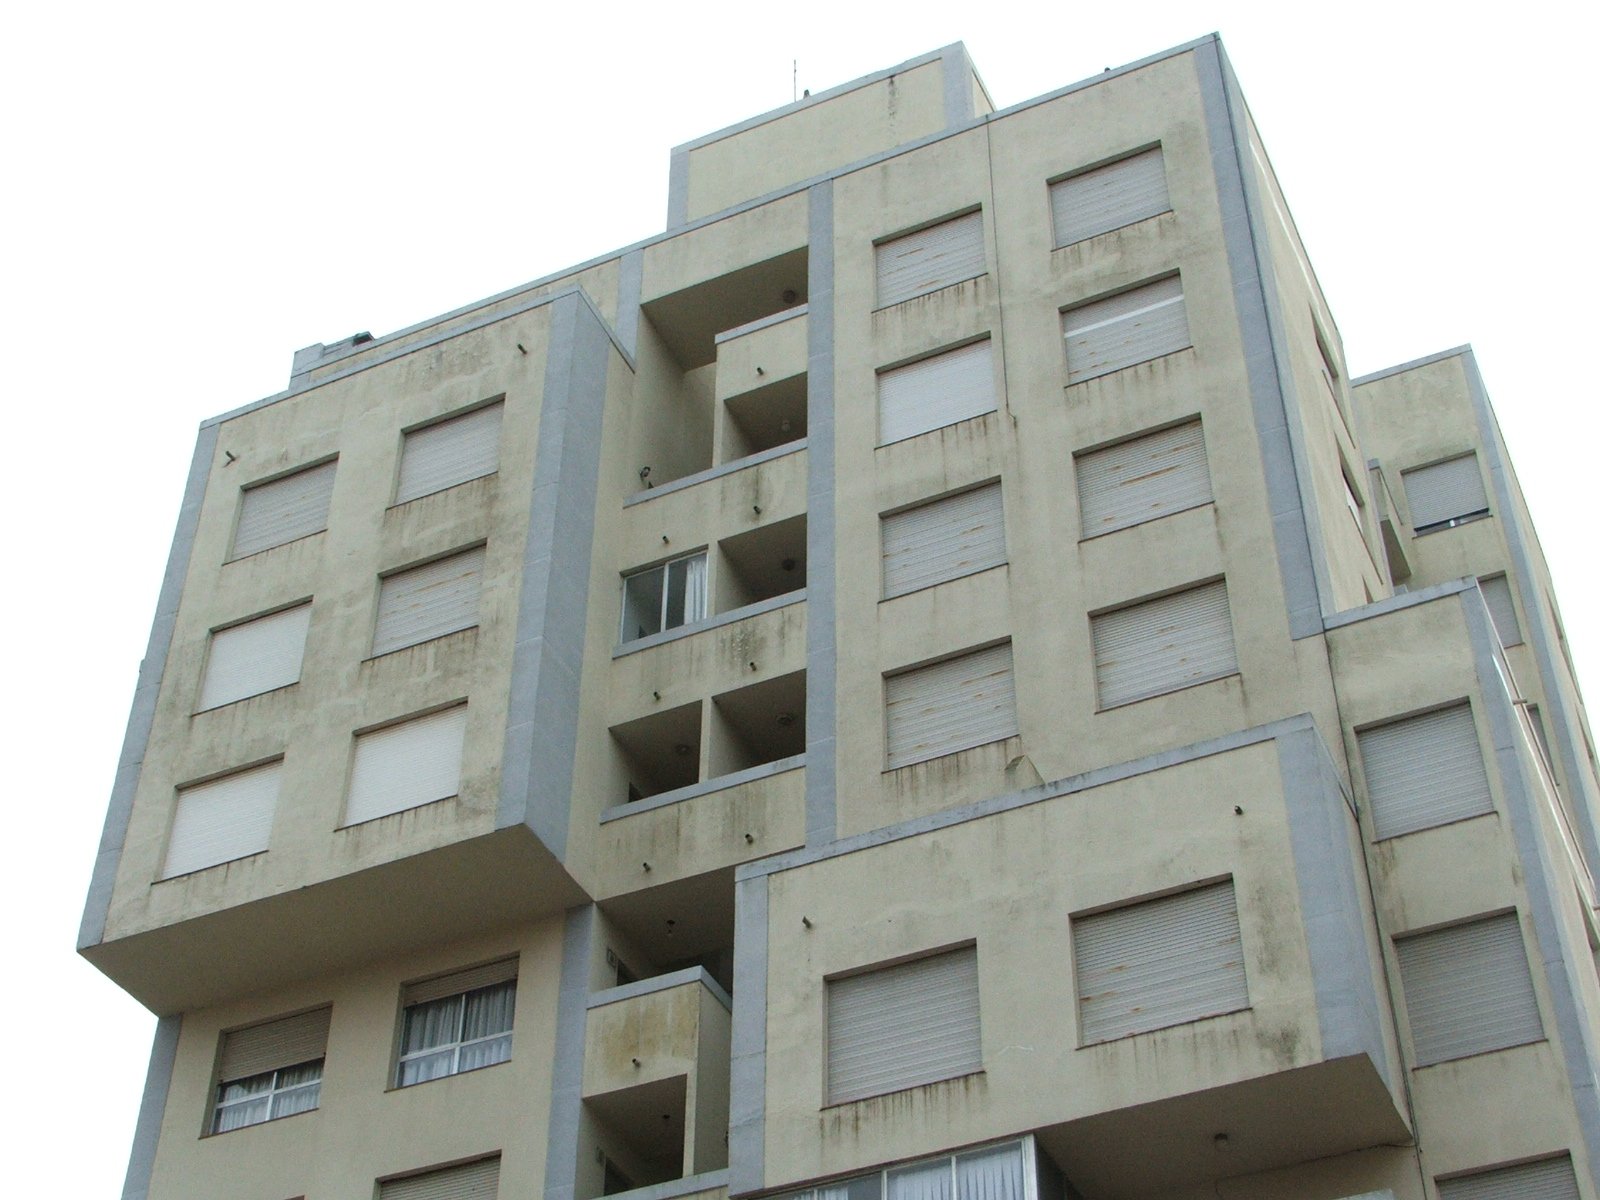 a large tall building that has several balconies on it